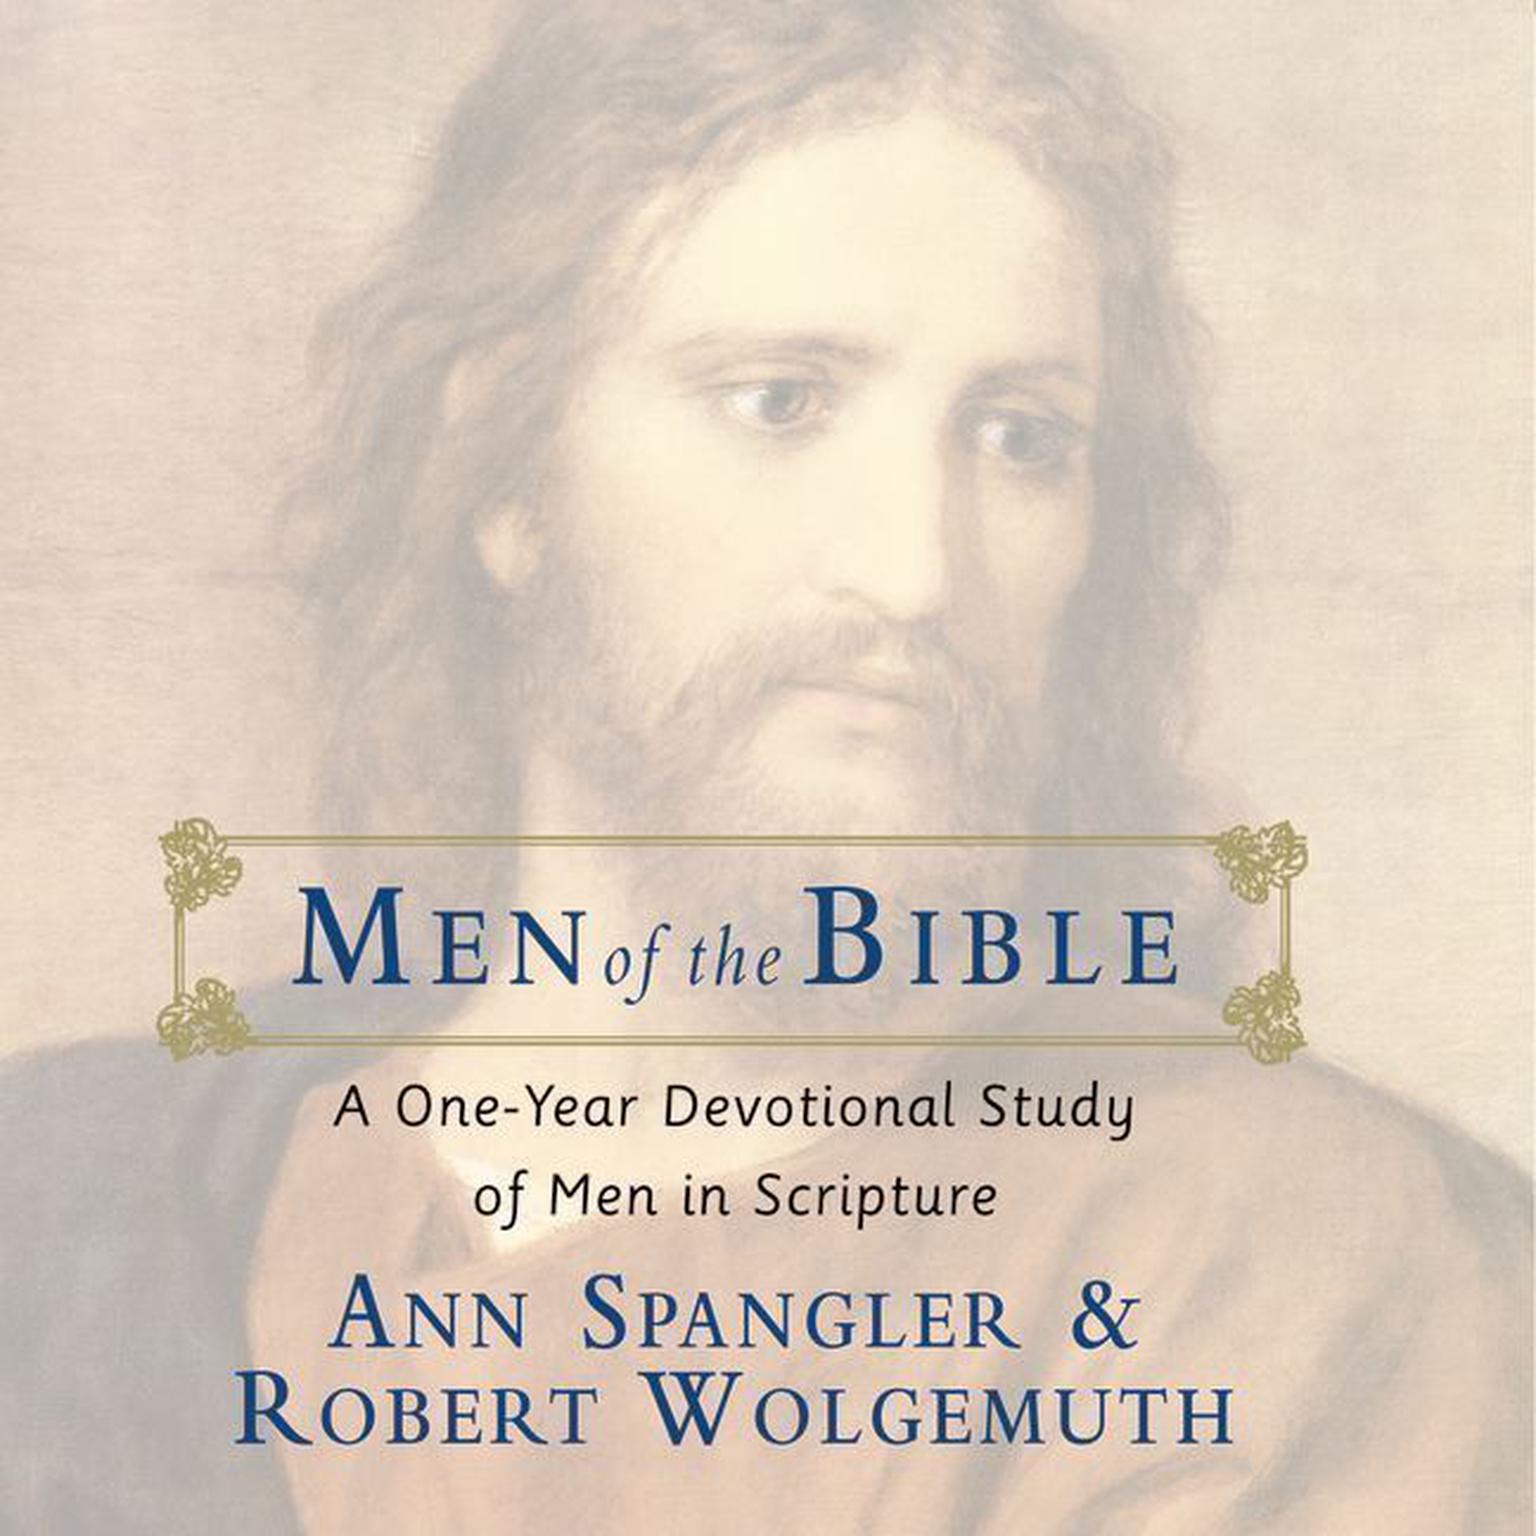 Men of the Bible: A One-Year Devotional Study of Men in Scripture Audiobook, by Ann Spangler